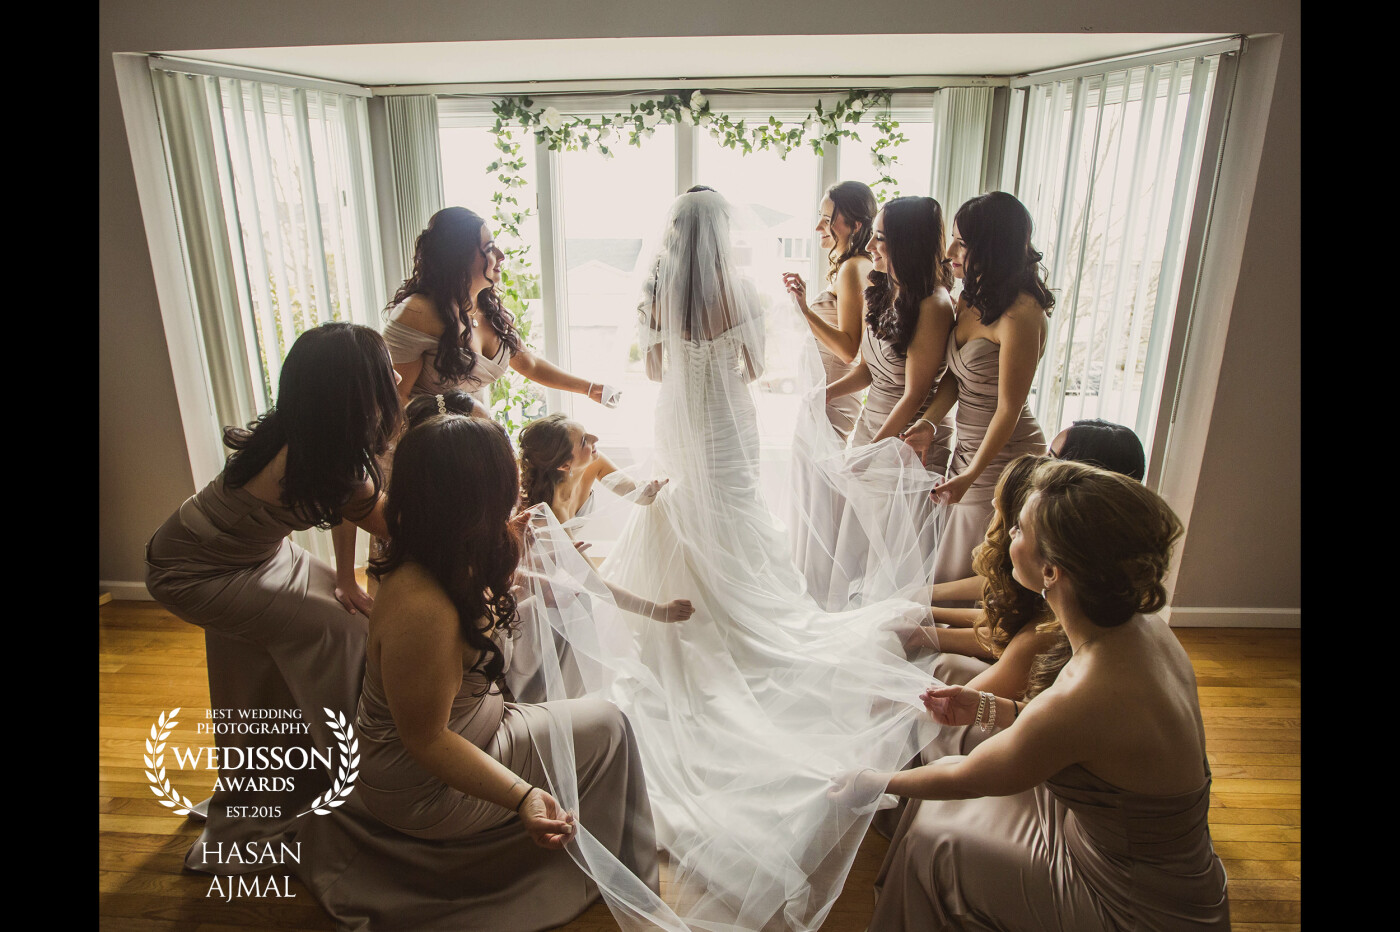 This shot was taken as the bride was by the window showing her bridesmaids her wedding dress and her veil. I loved the way the light was coming from the window and had to snap a shot of them in this moment. 